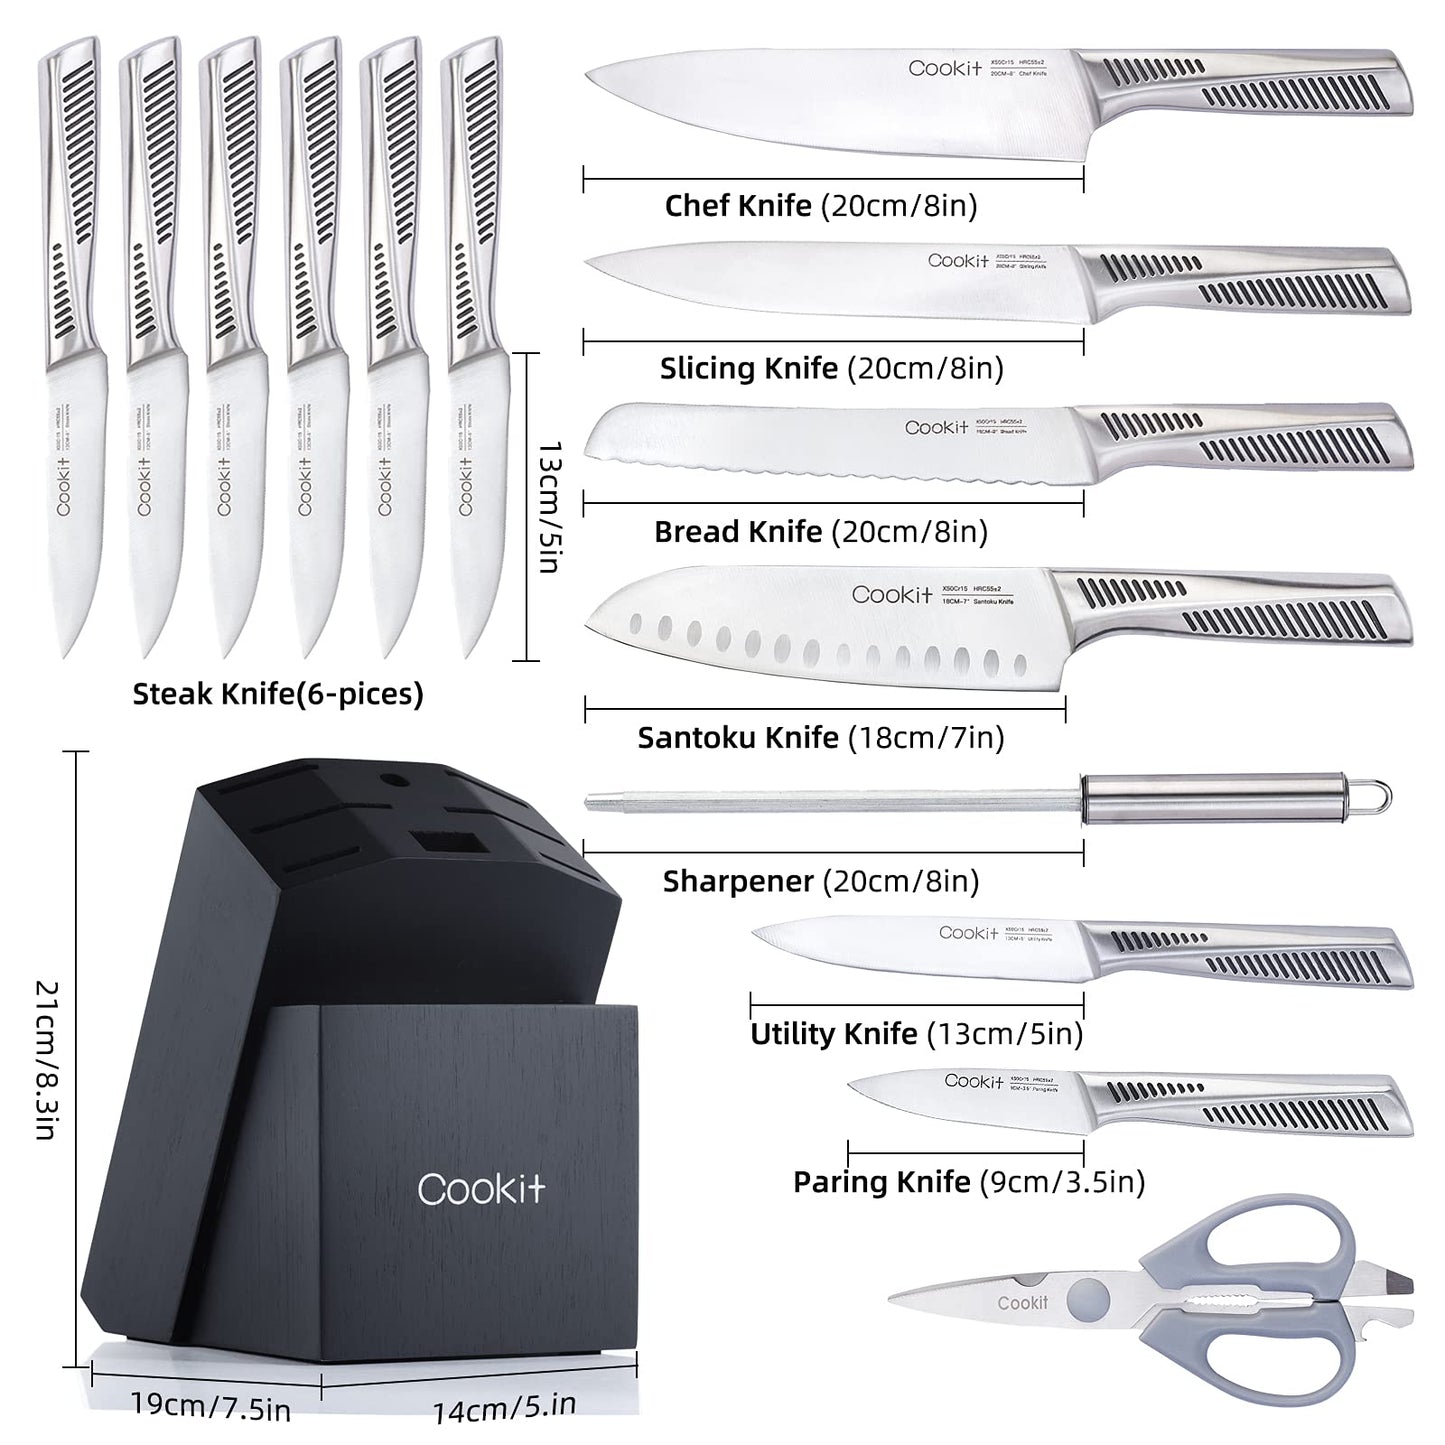 Kitchen Knife Set, 15 Piece Knife Sets with Block, Non-Slip German Stainless Steel with Multifunctional Scissors Knife Sharpener